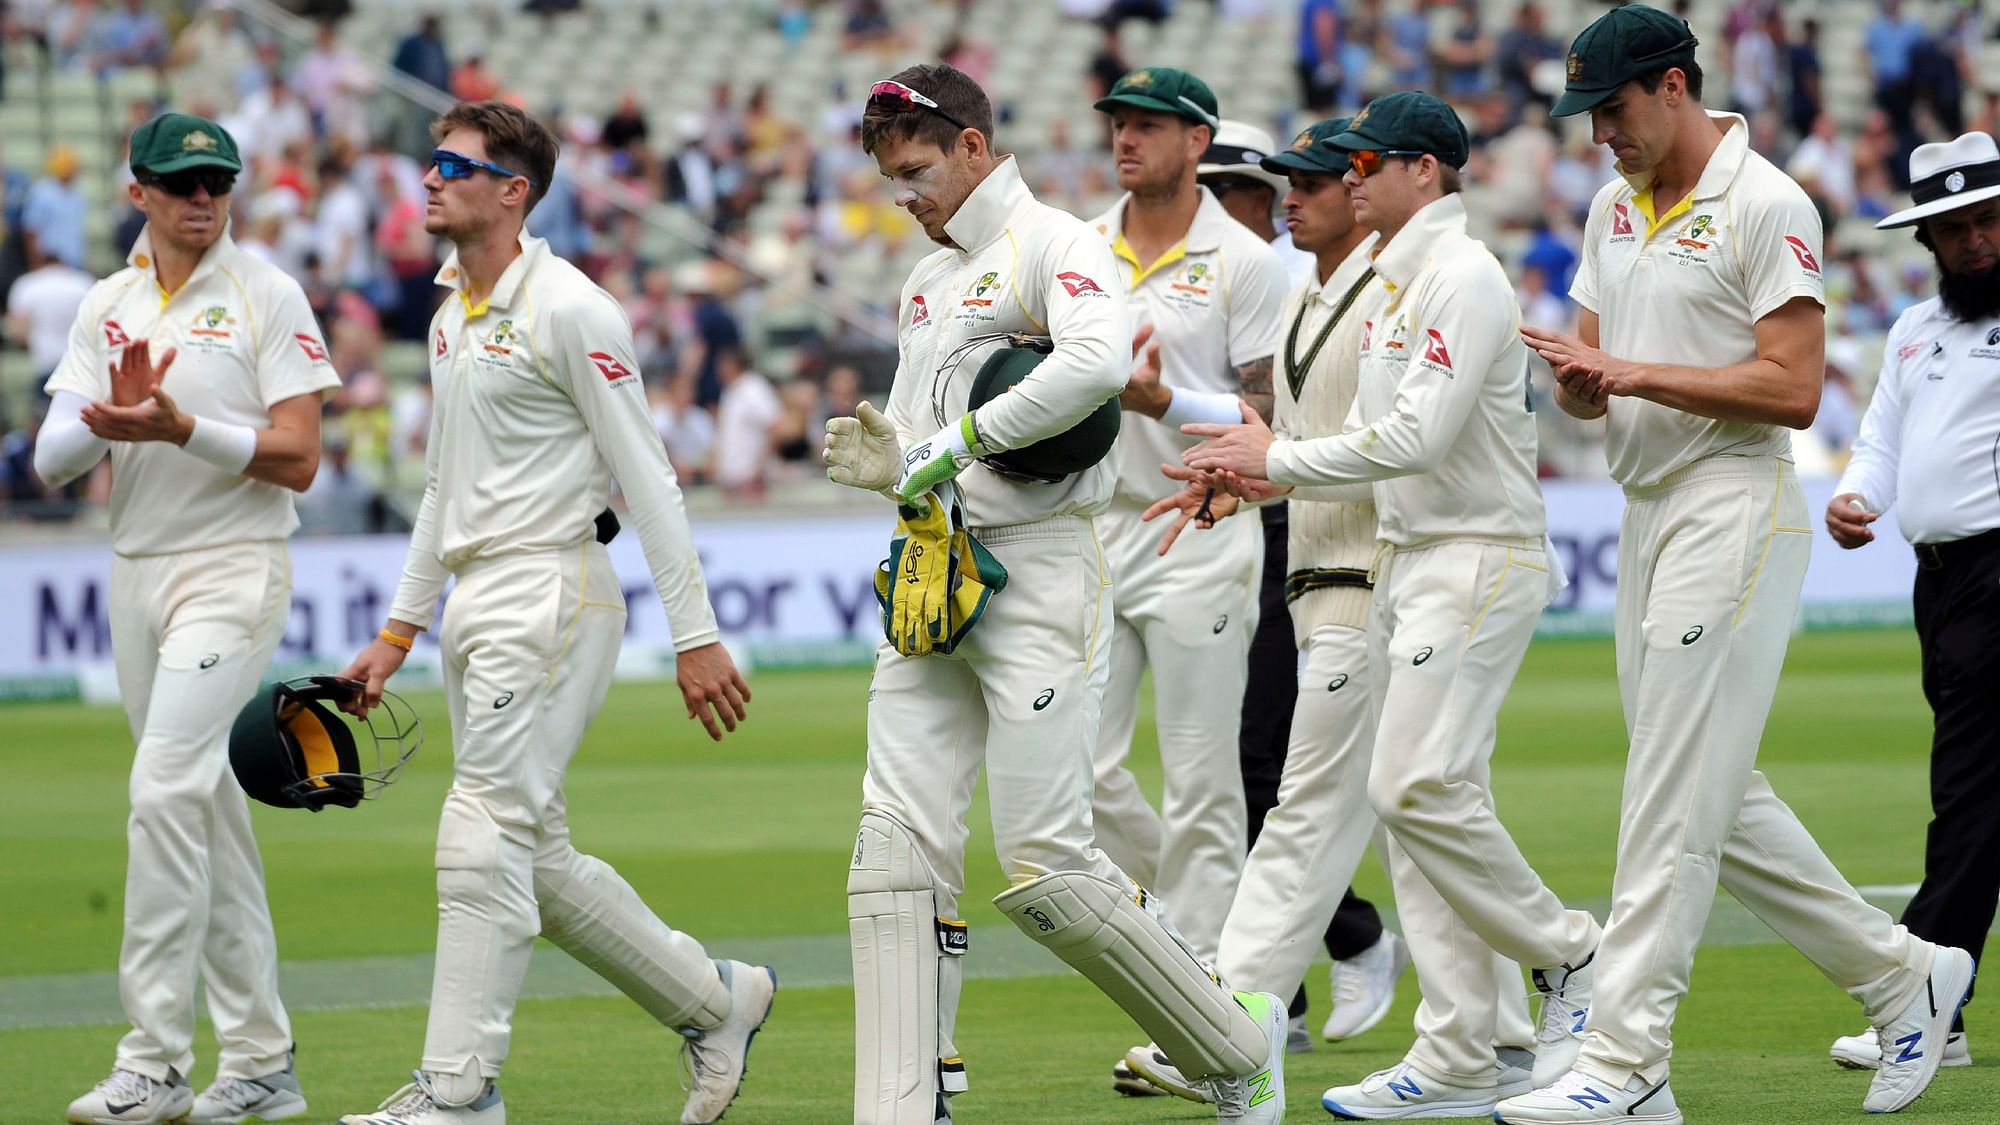 Australia won the first Ashes Test by a huge 251 runs against England on Monday, 5 August.